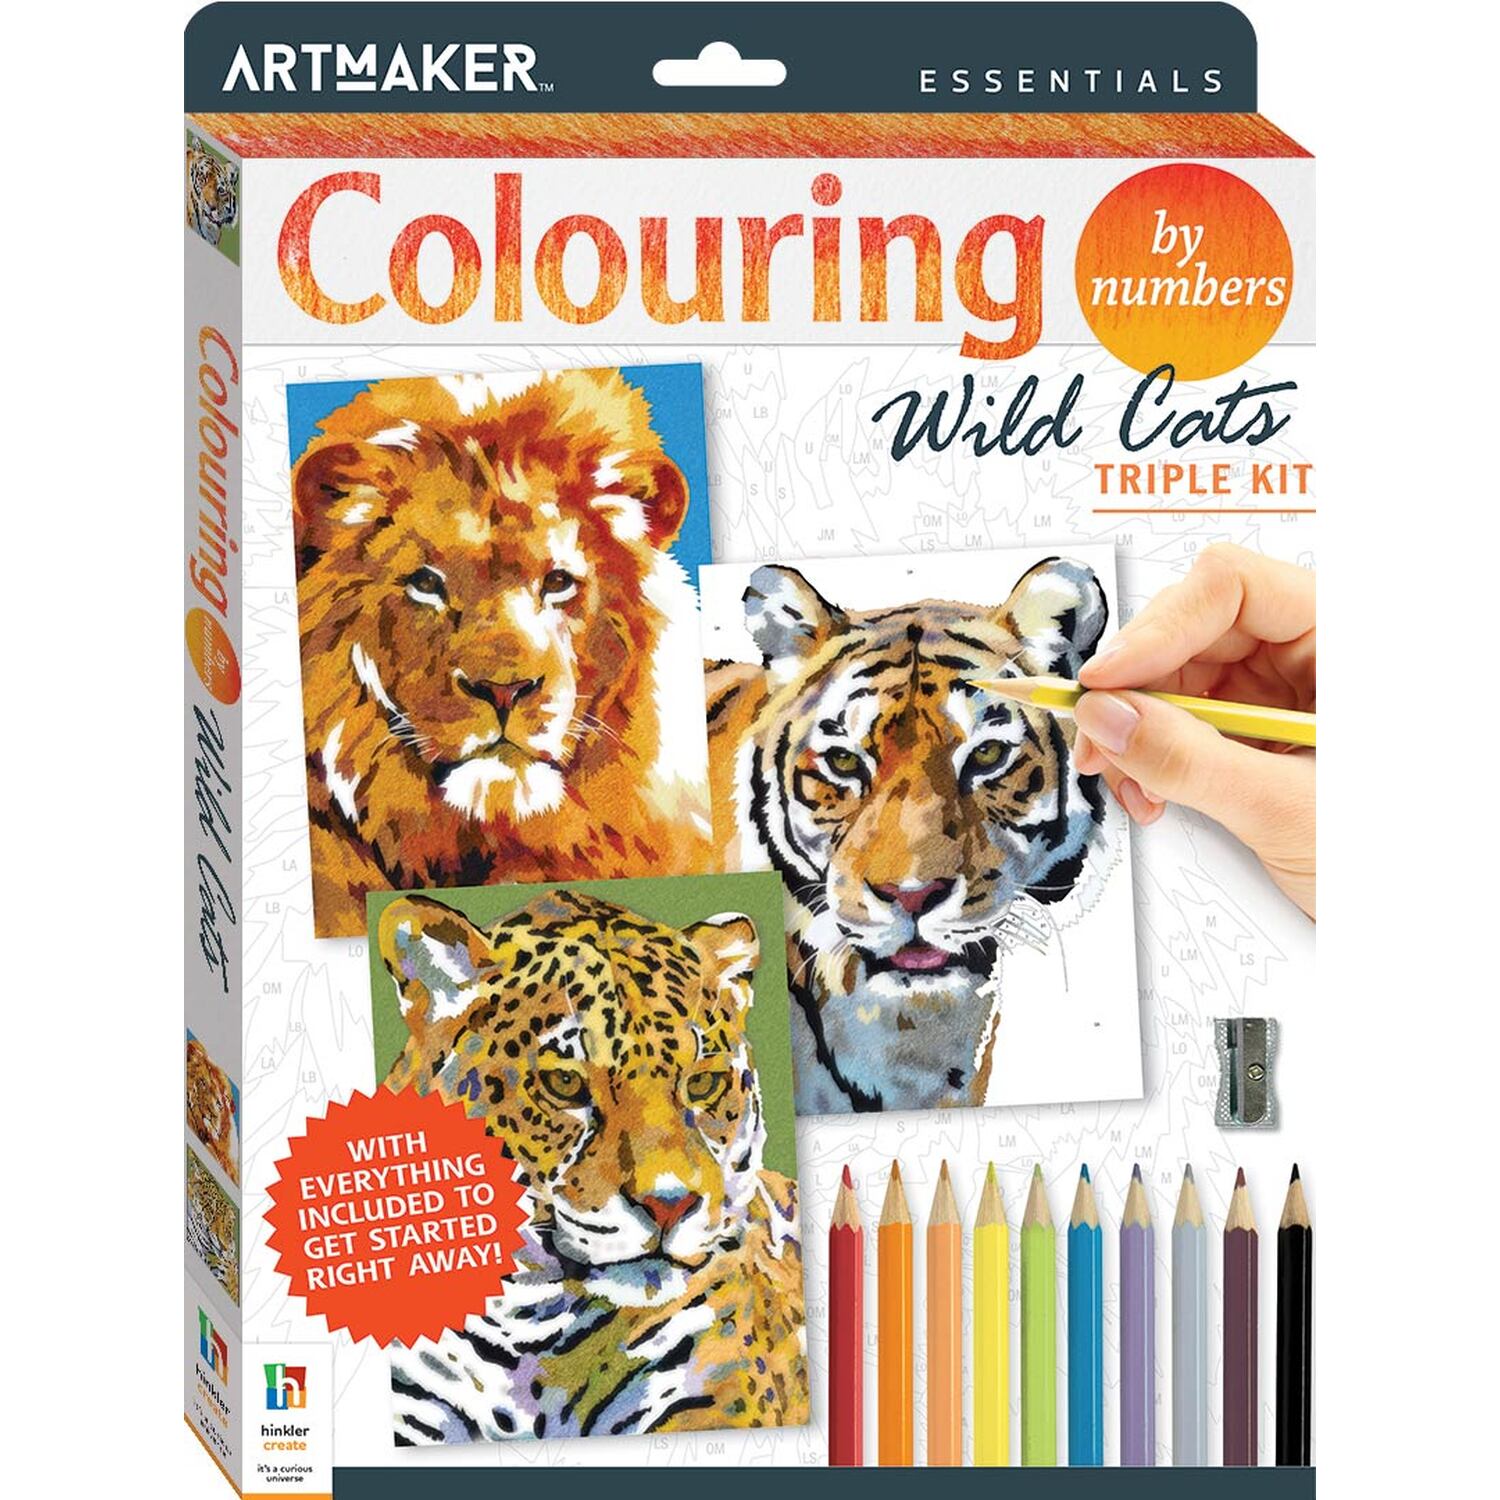 Colouring by Numbers Triple Kit - Wild Cats Image